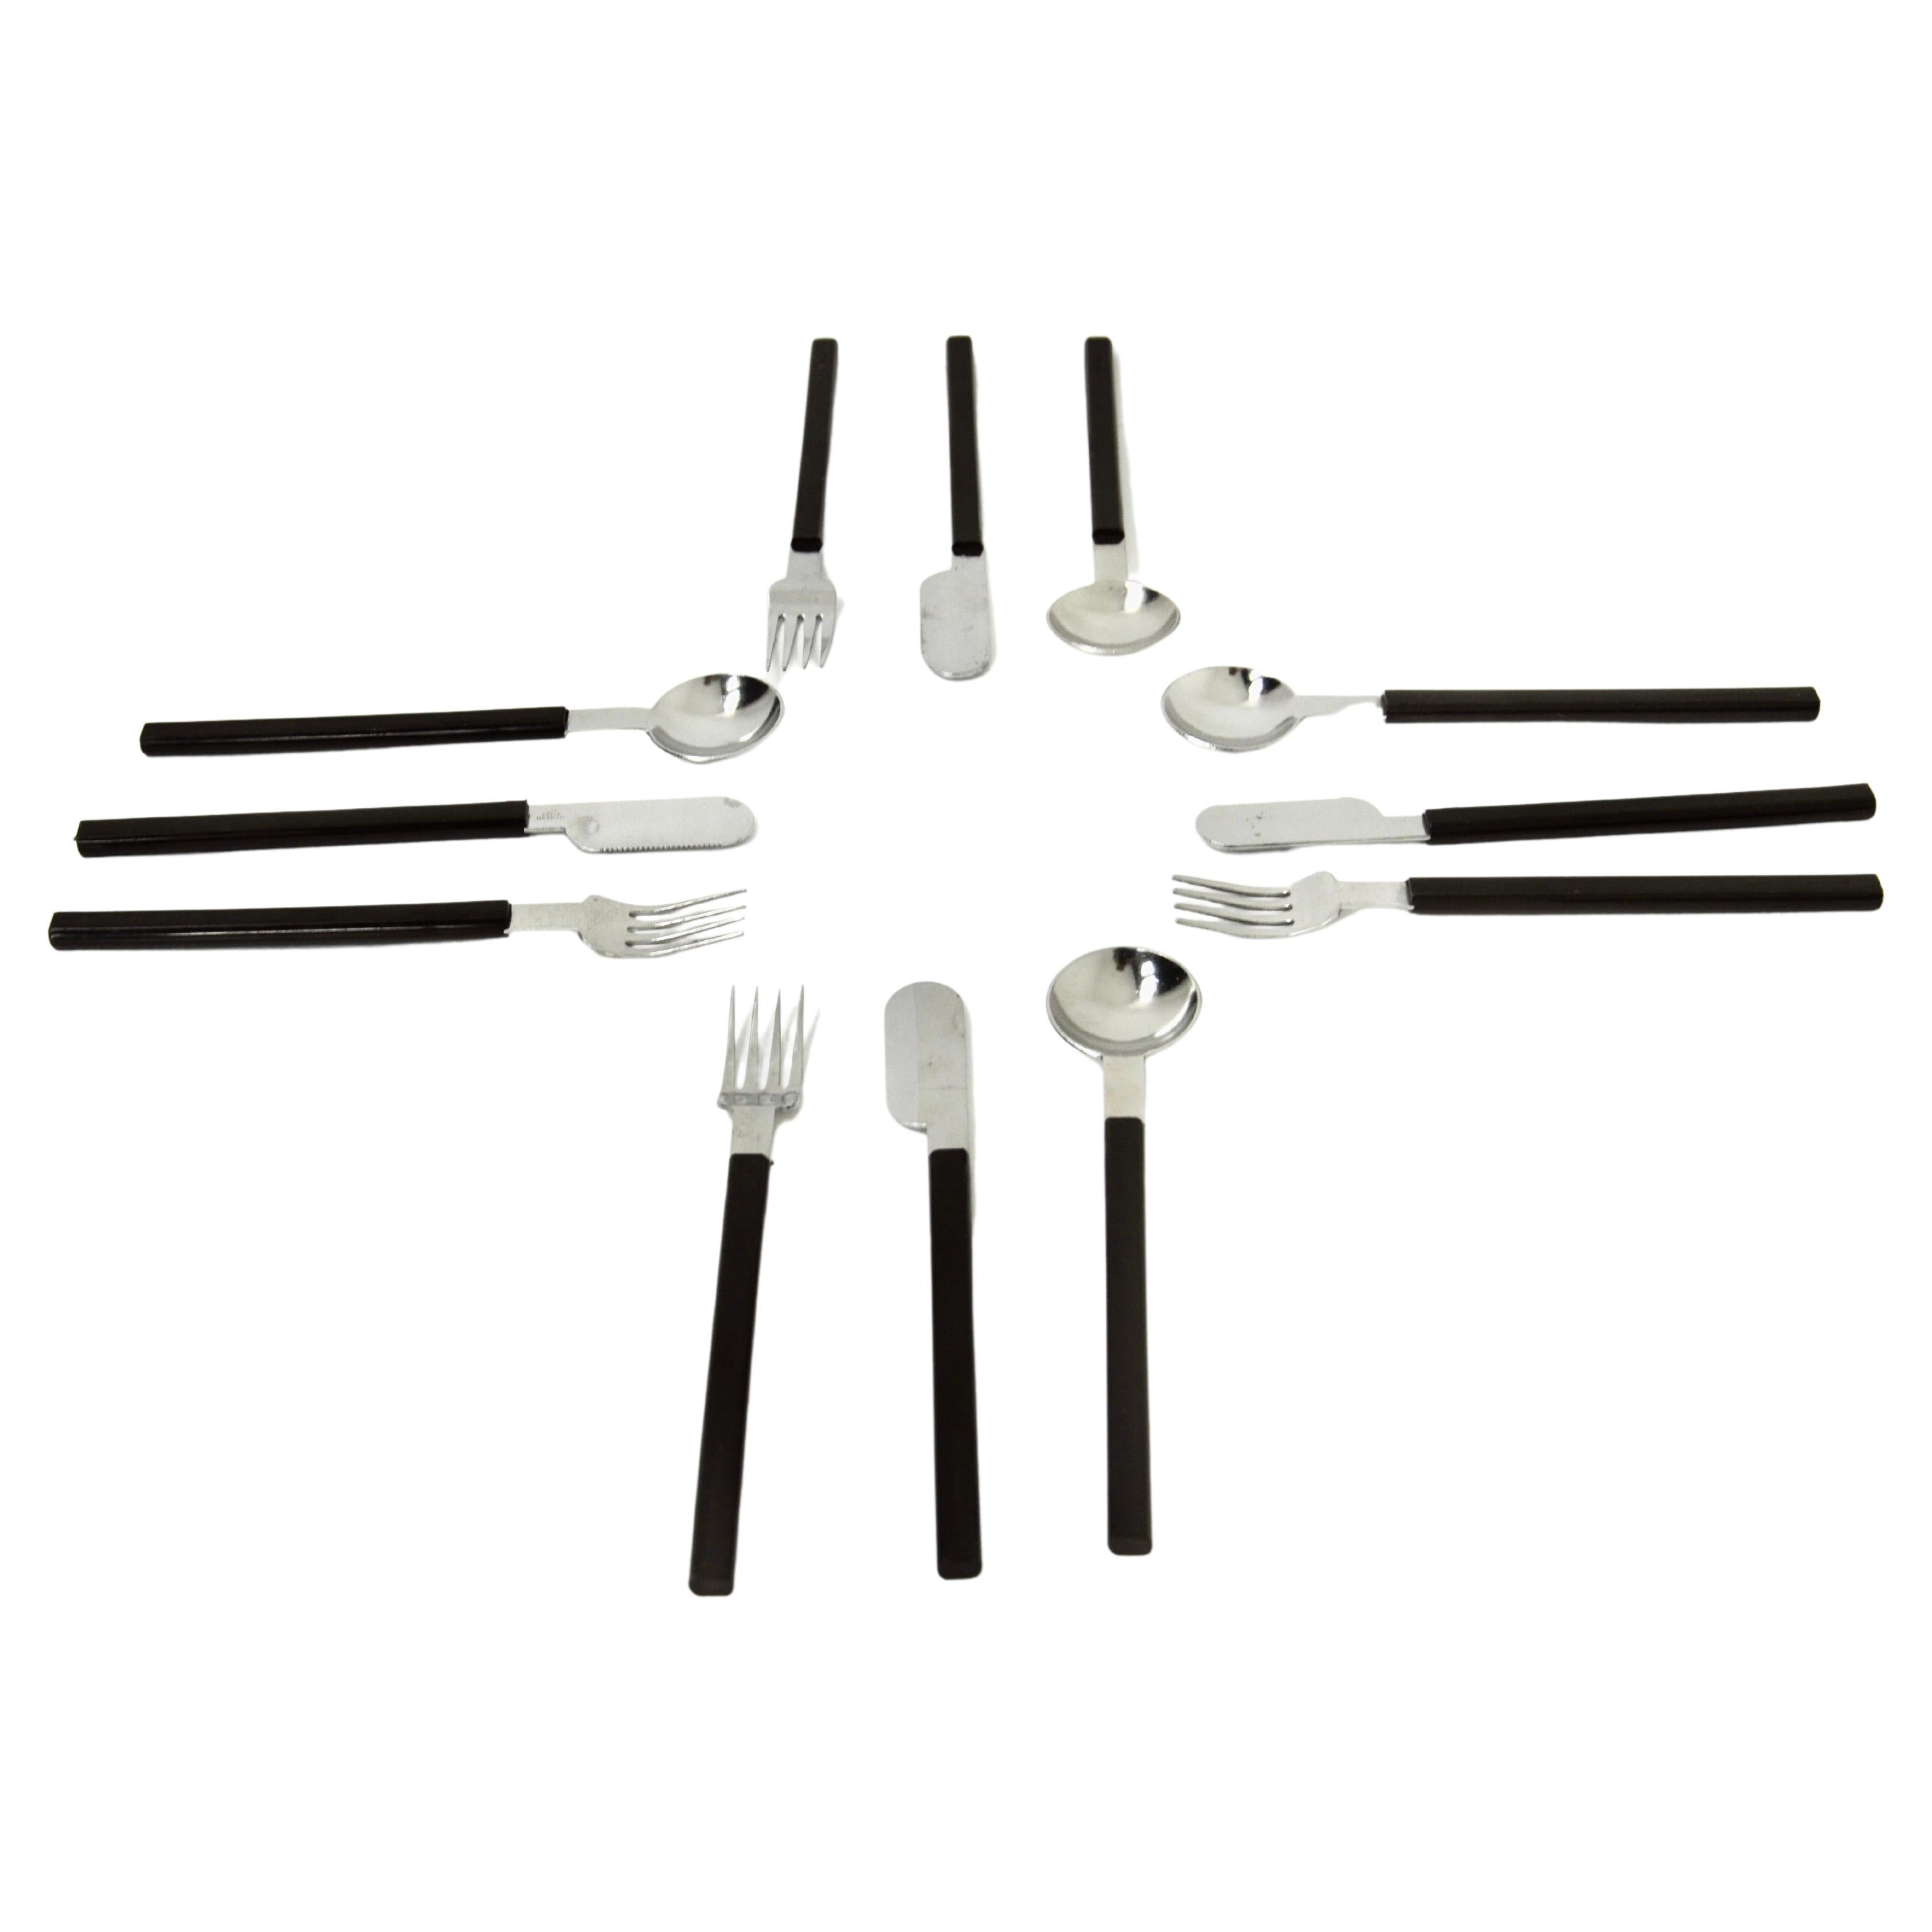 Concorde cutlery set by Raymond Loewy for Air France, Set of 12 pieces For Sale